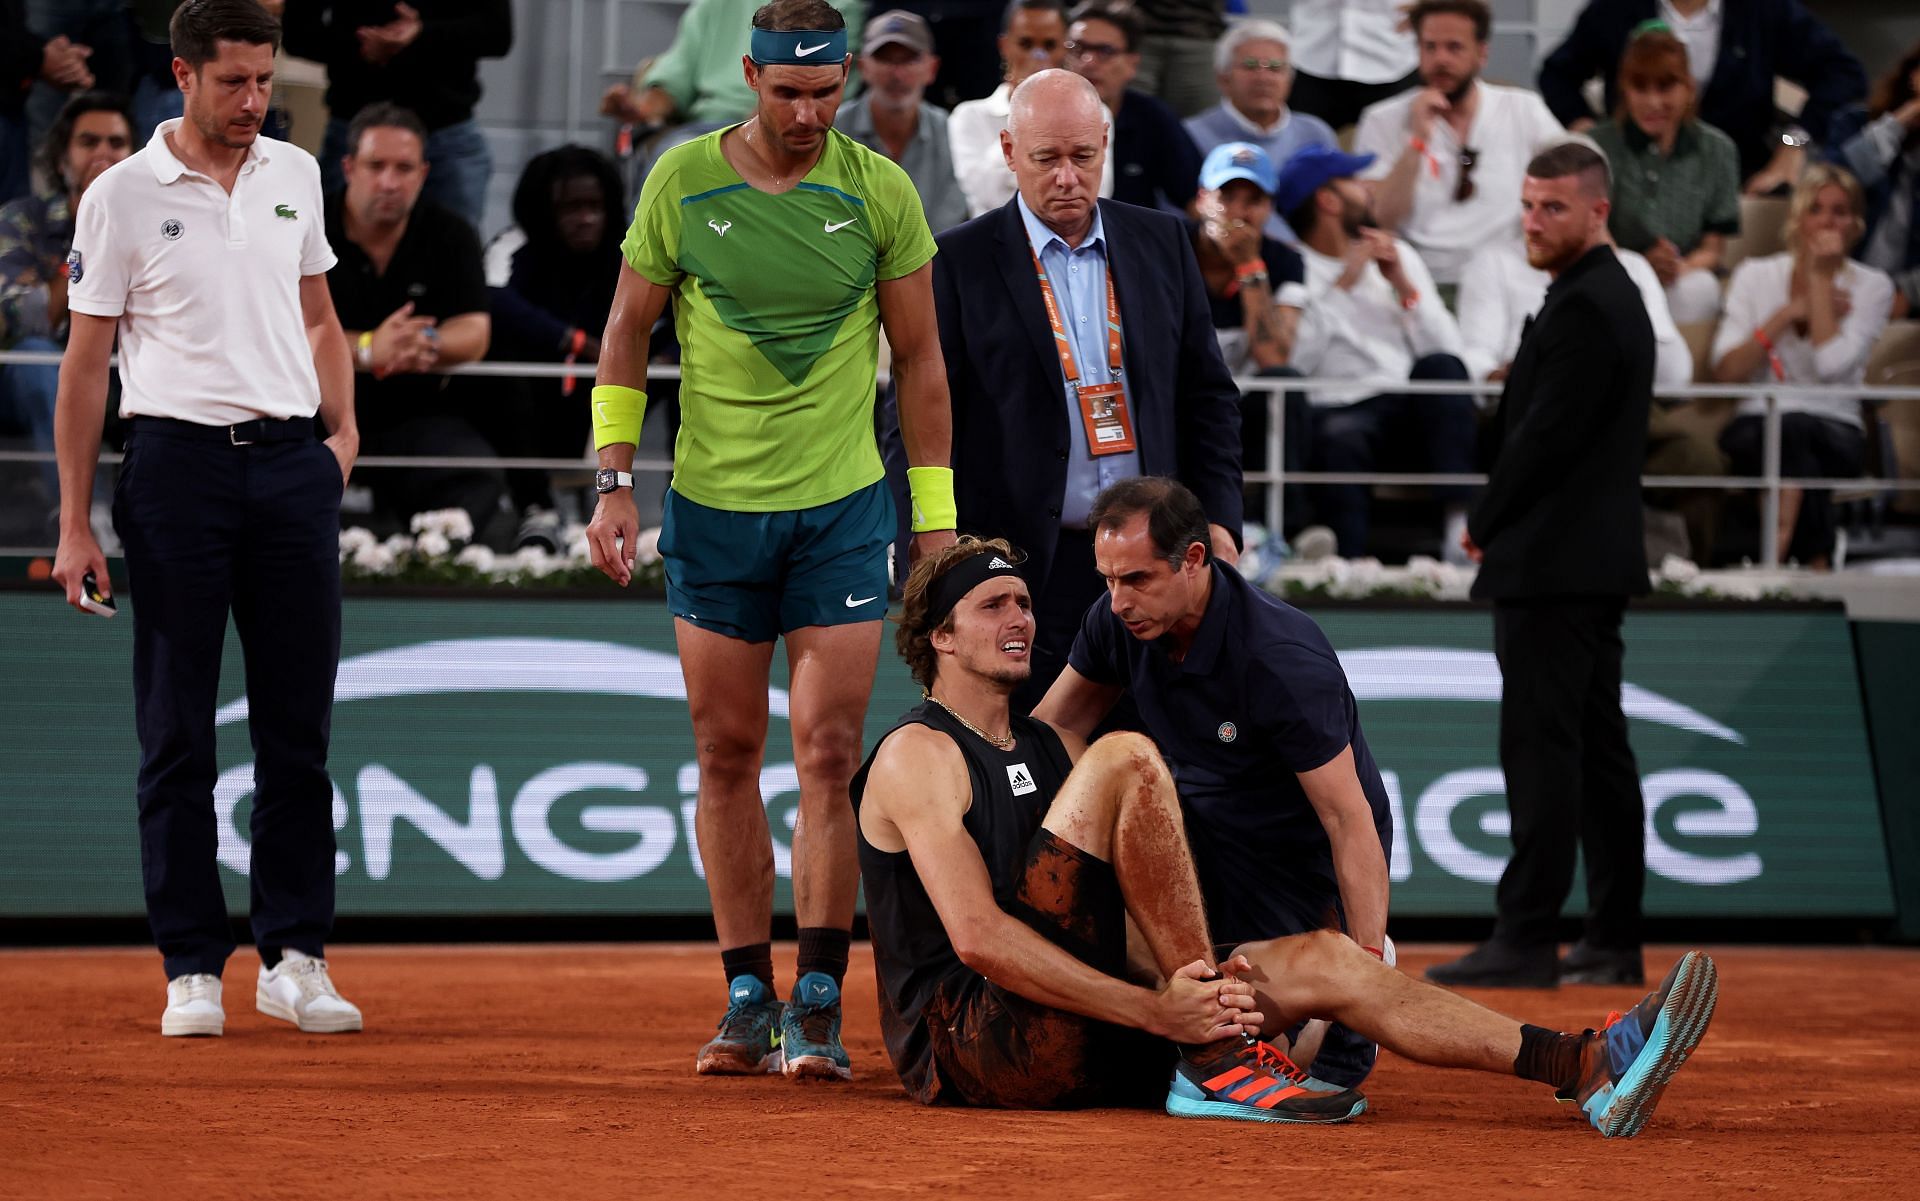 Alexander Zverev suffered an ankle injury at the French Open 2022